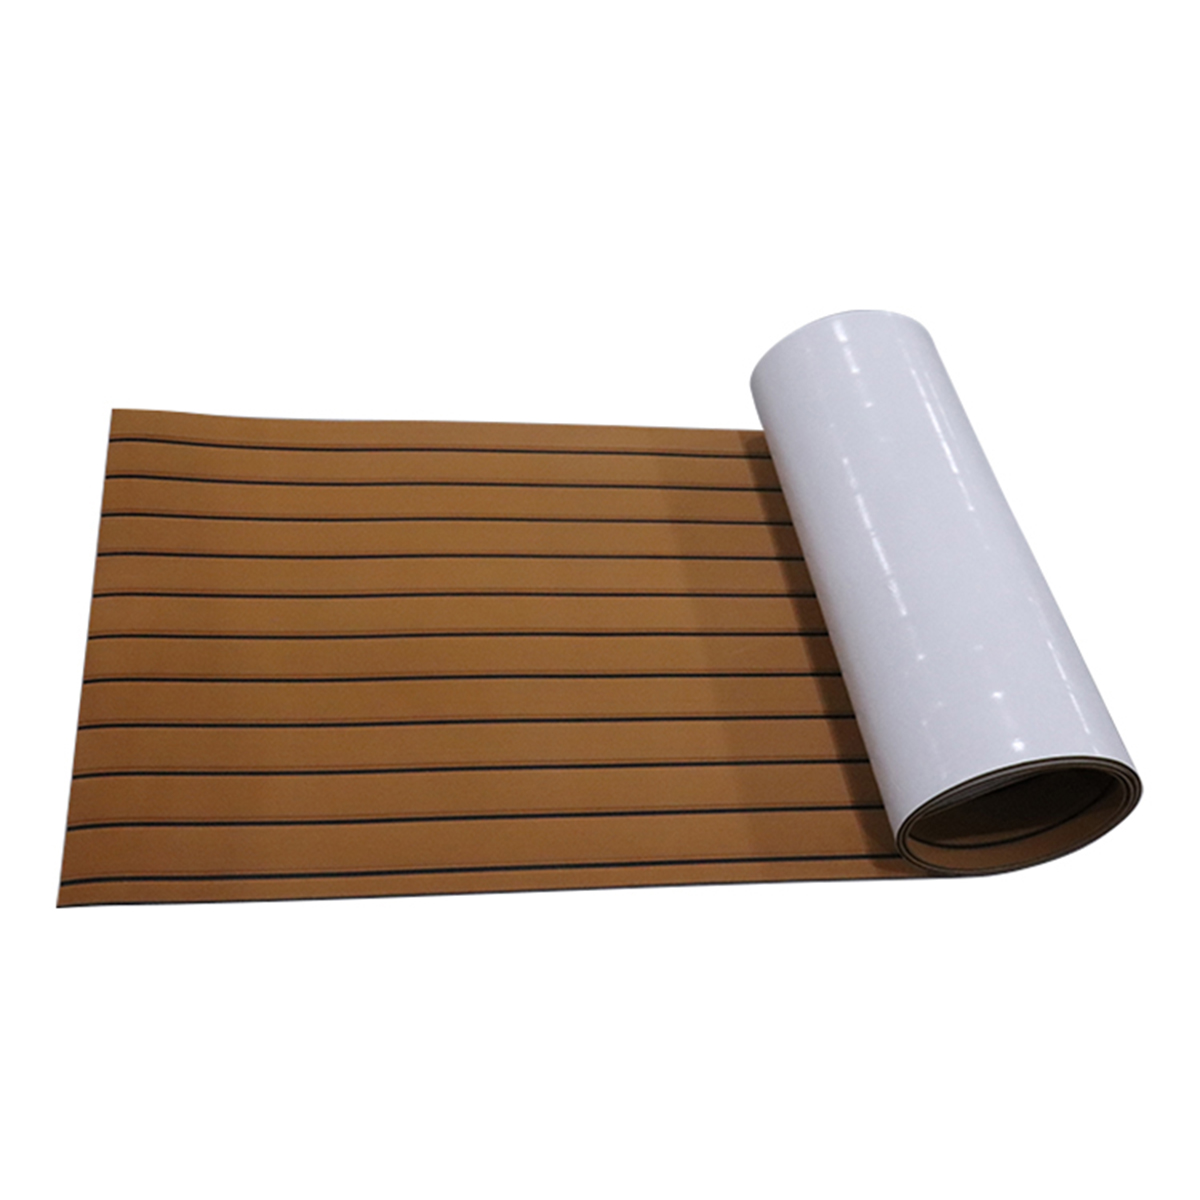 Find 450x2400x5mm Marine Flooring Faux Teak Self Adhesive EVA Teak Decking Sheet for Sale on Gipsybee.com with cryptocurrencies